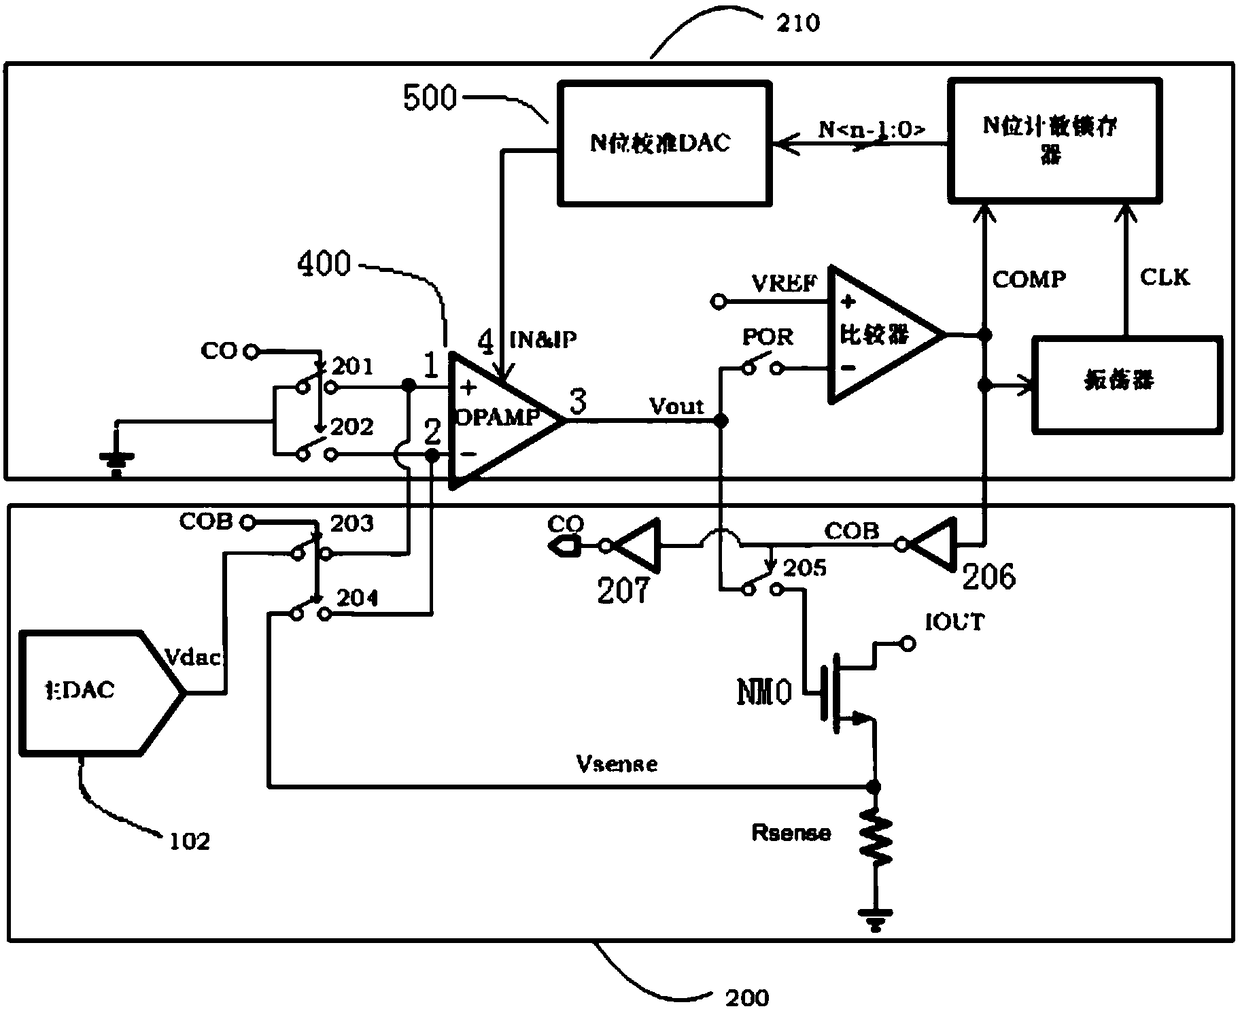 Operational amplifier offset self-calibration circuit applied to voice coil motor driver chip